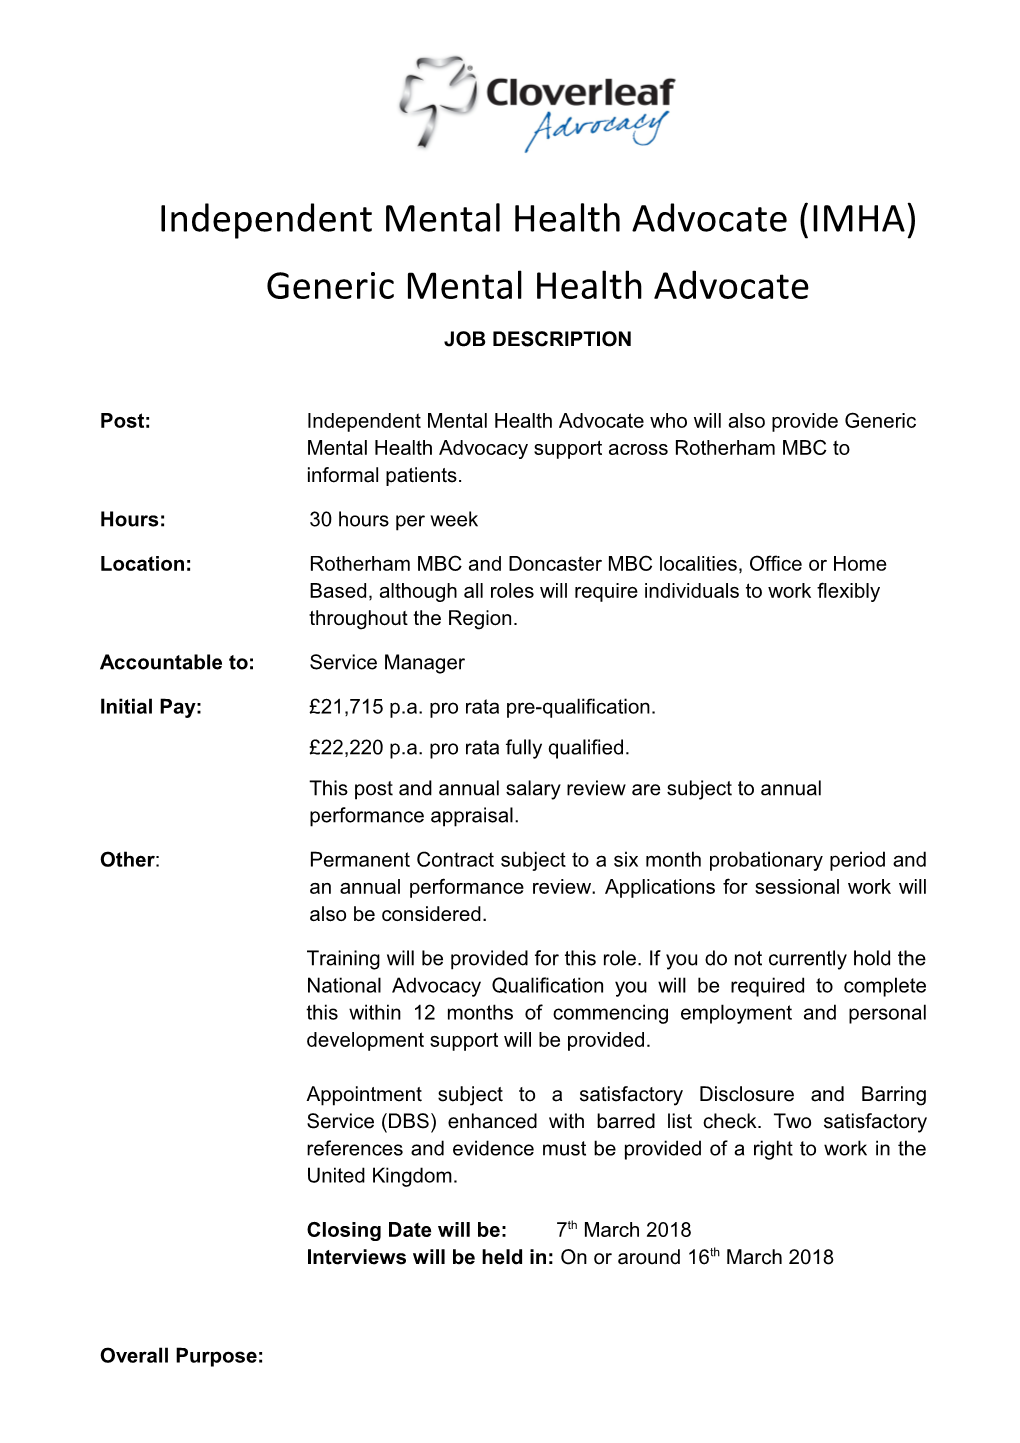 Independent Mental Health Advocate (IMHA)